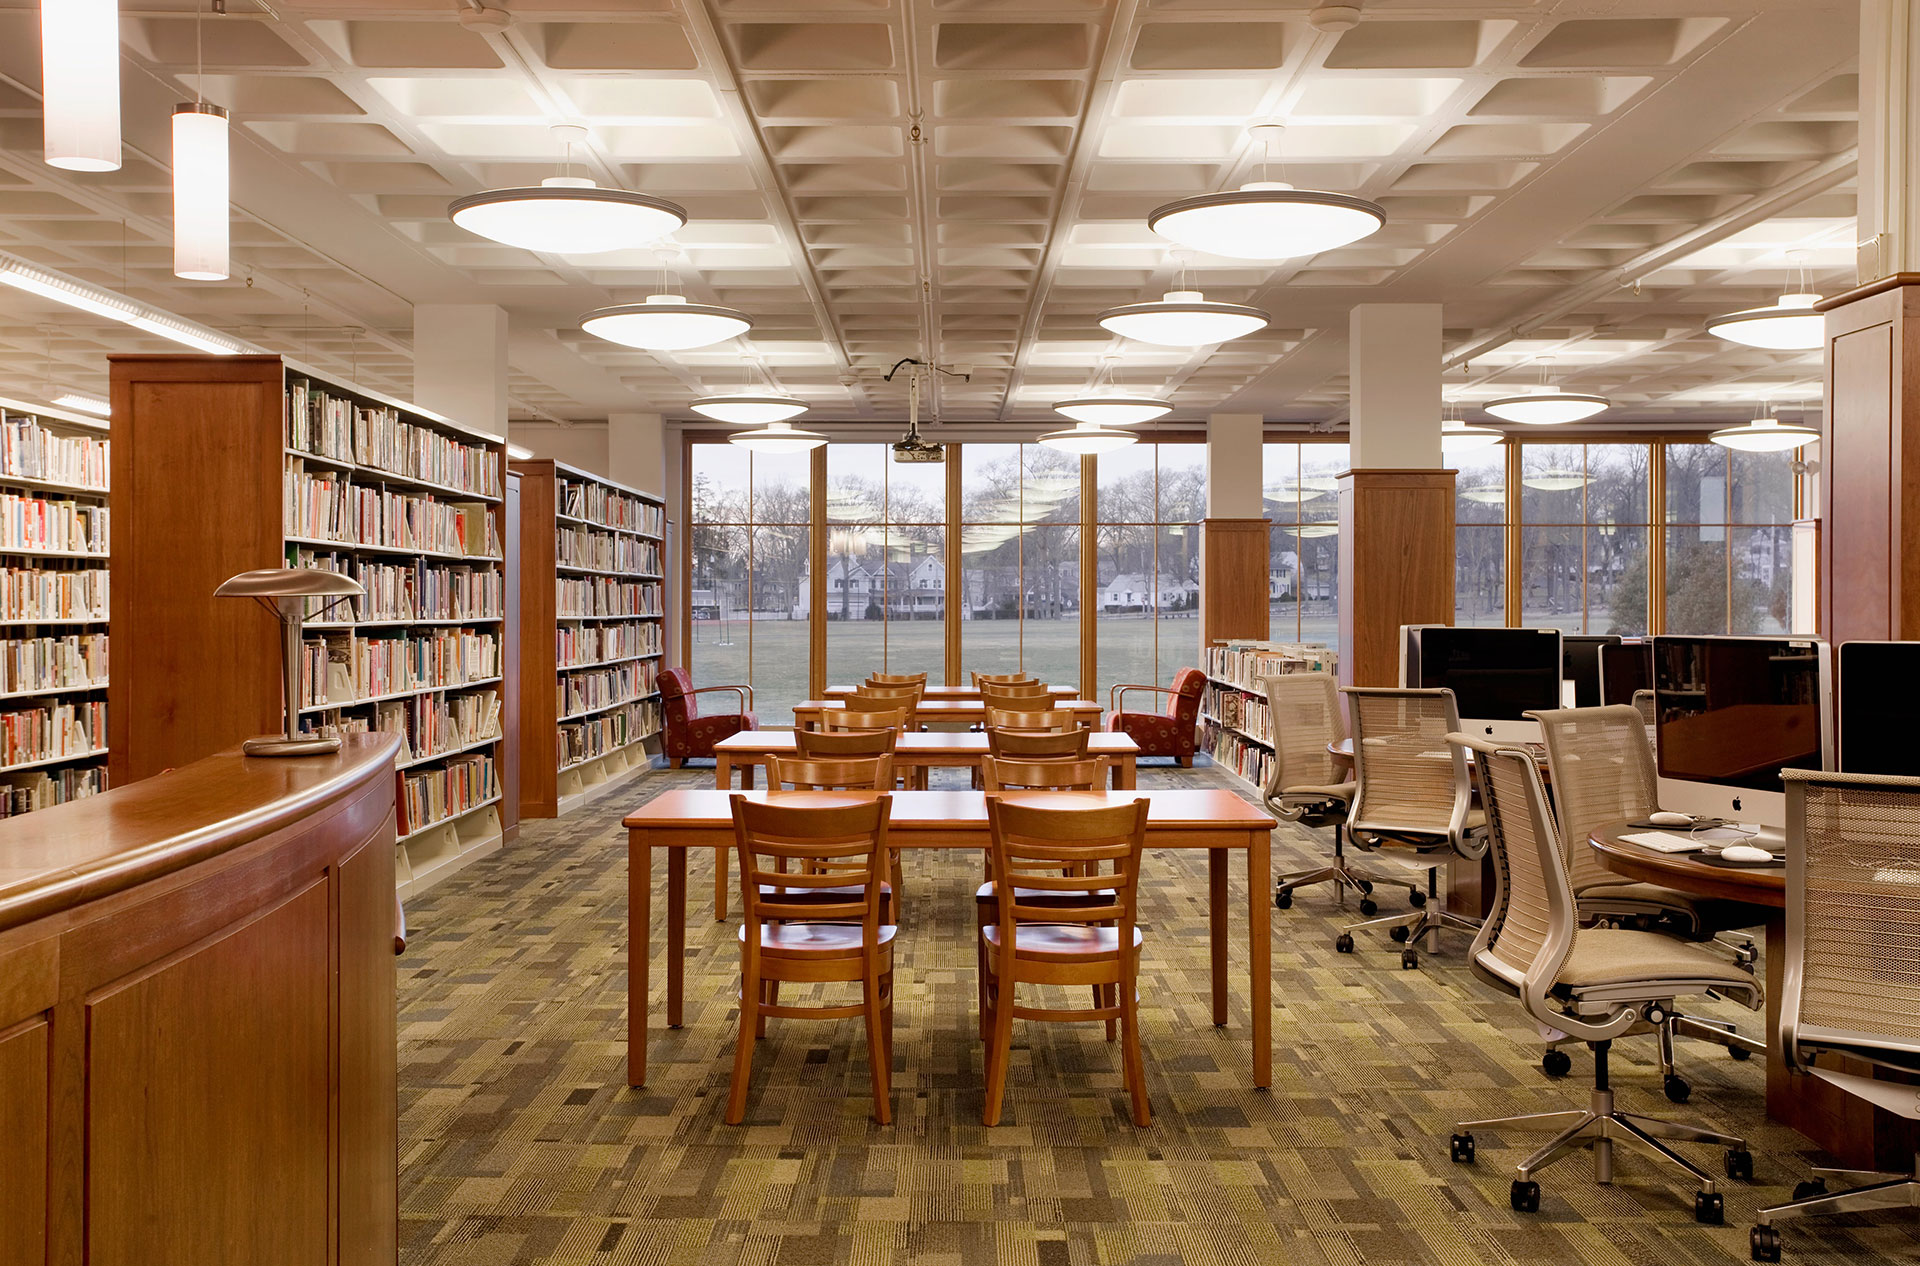 Thayer Academy Library and Art Gallery - Campus Architecture